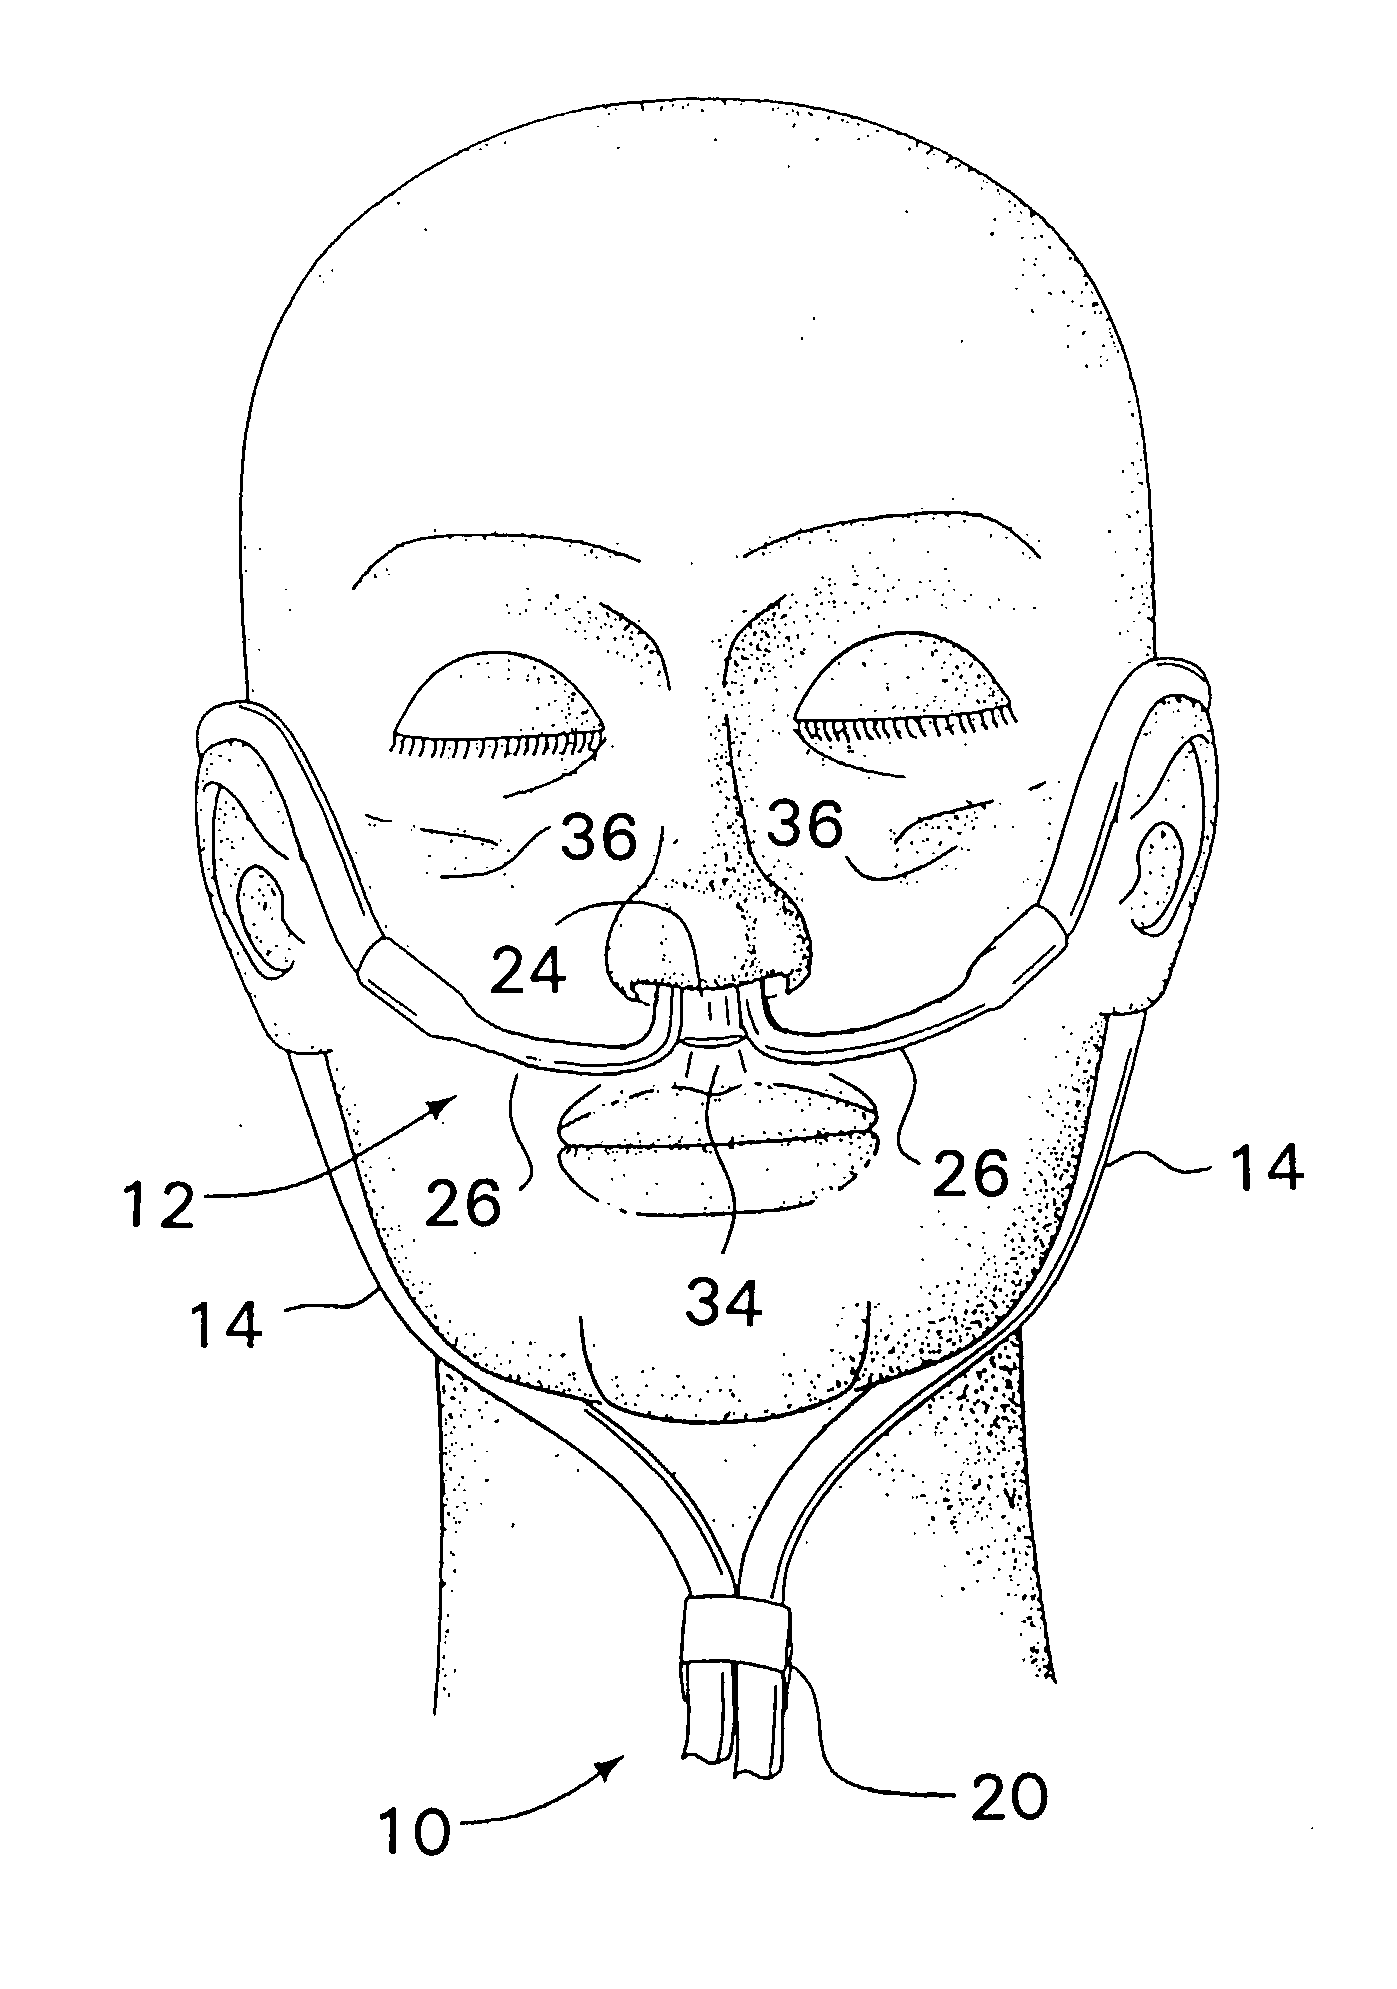 Respiratory Therapy System Including a Nasal Cannula Assembly